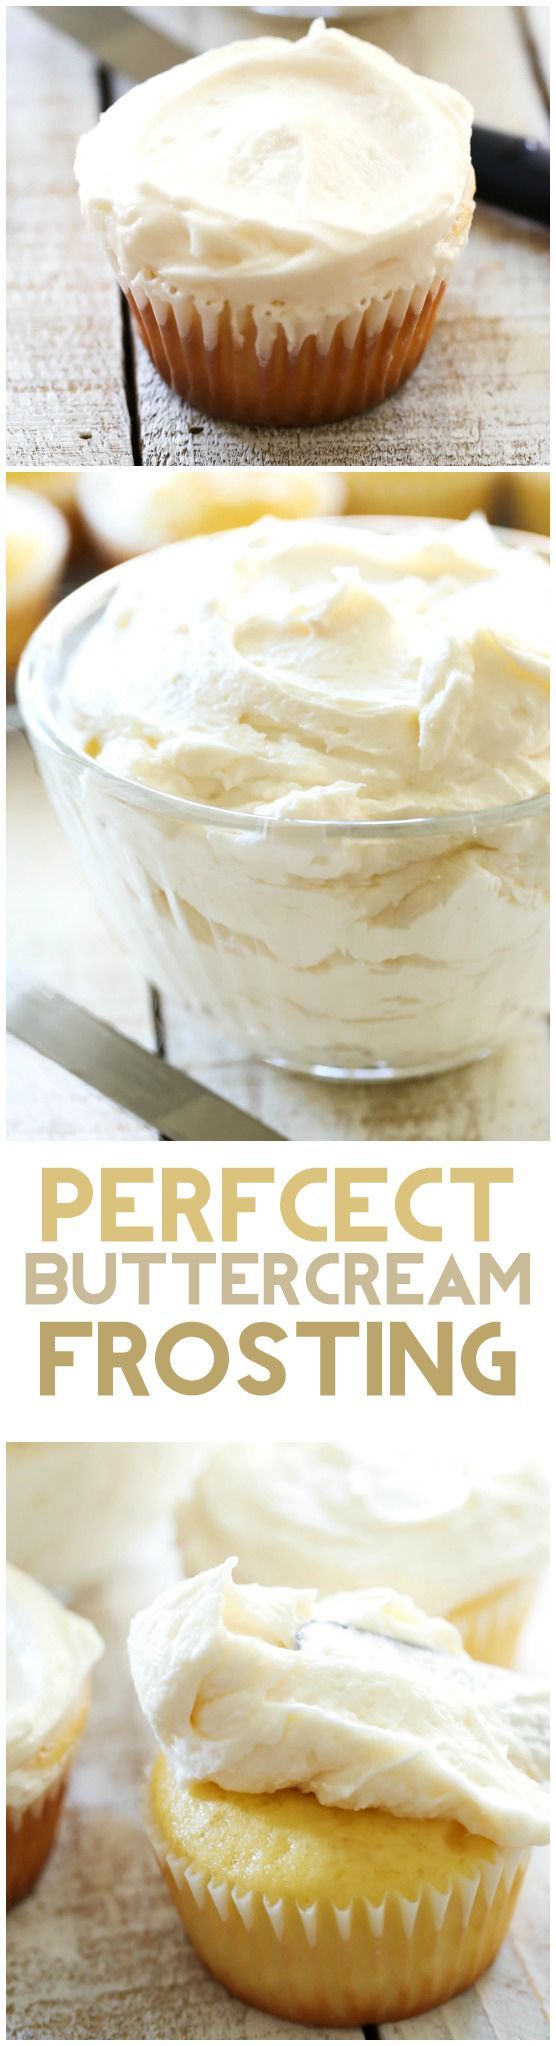 This Classic Buttercream Frosting recipe is perfection! Perfect consistency and perfect flavor! This is my